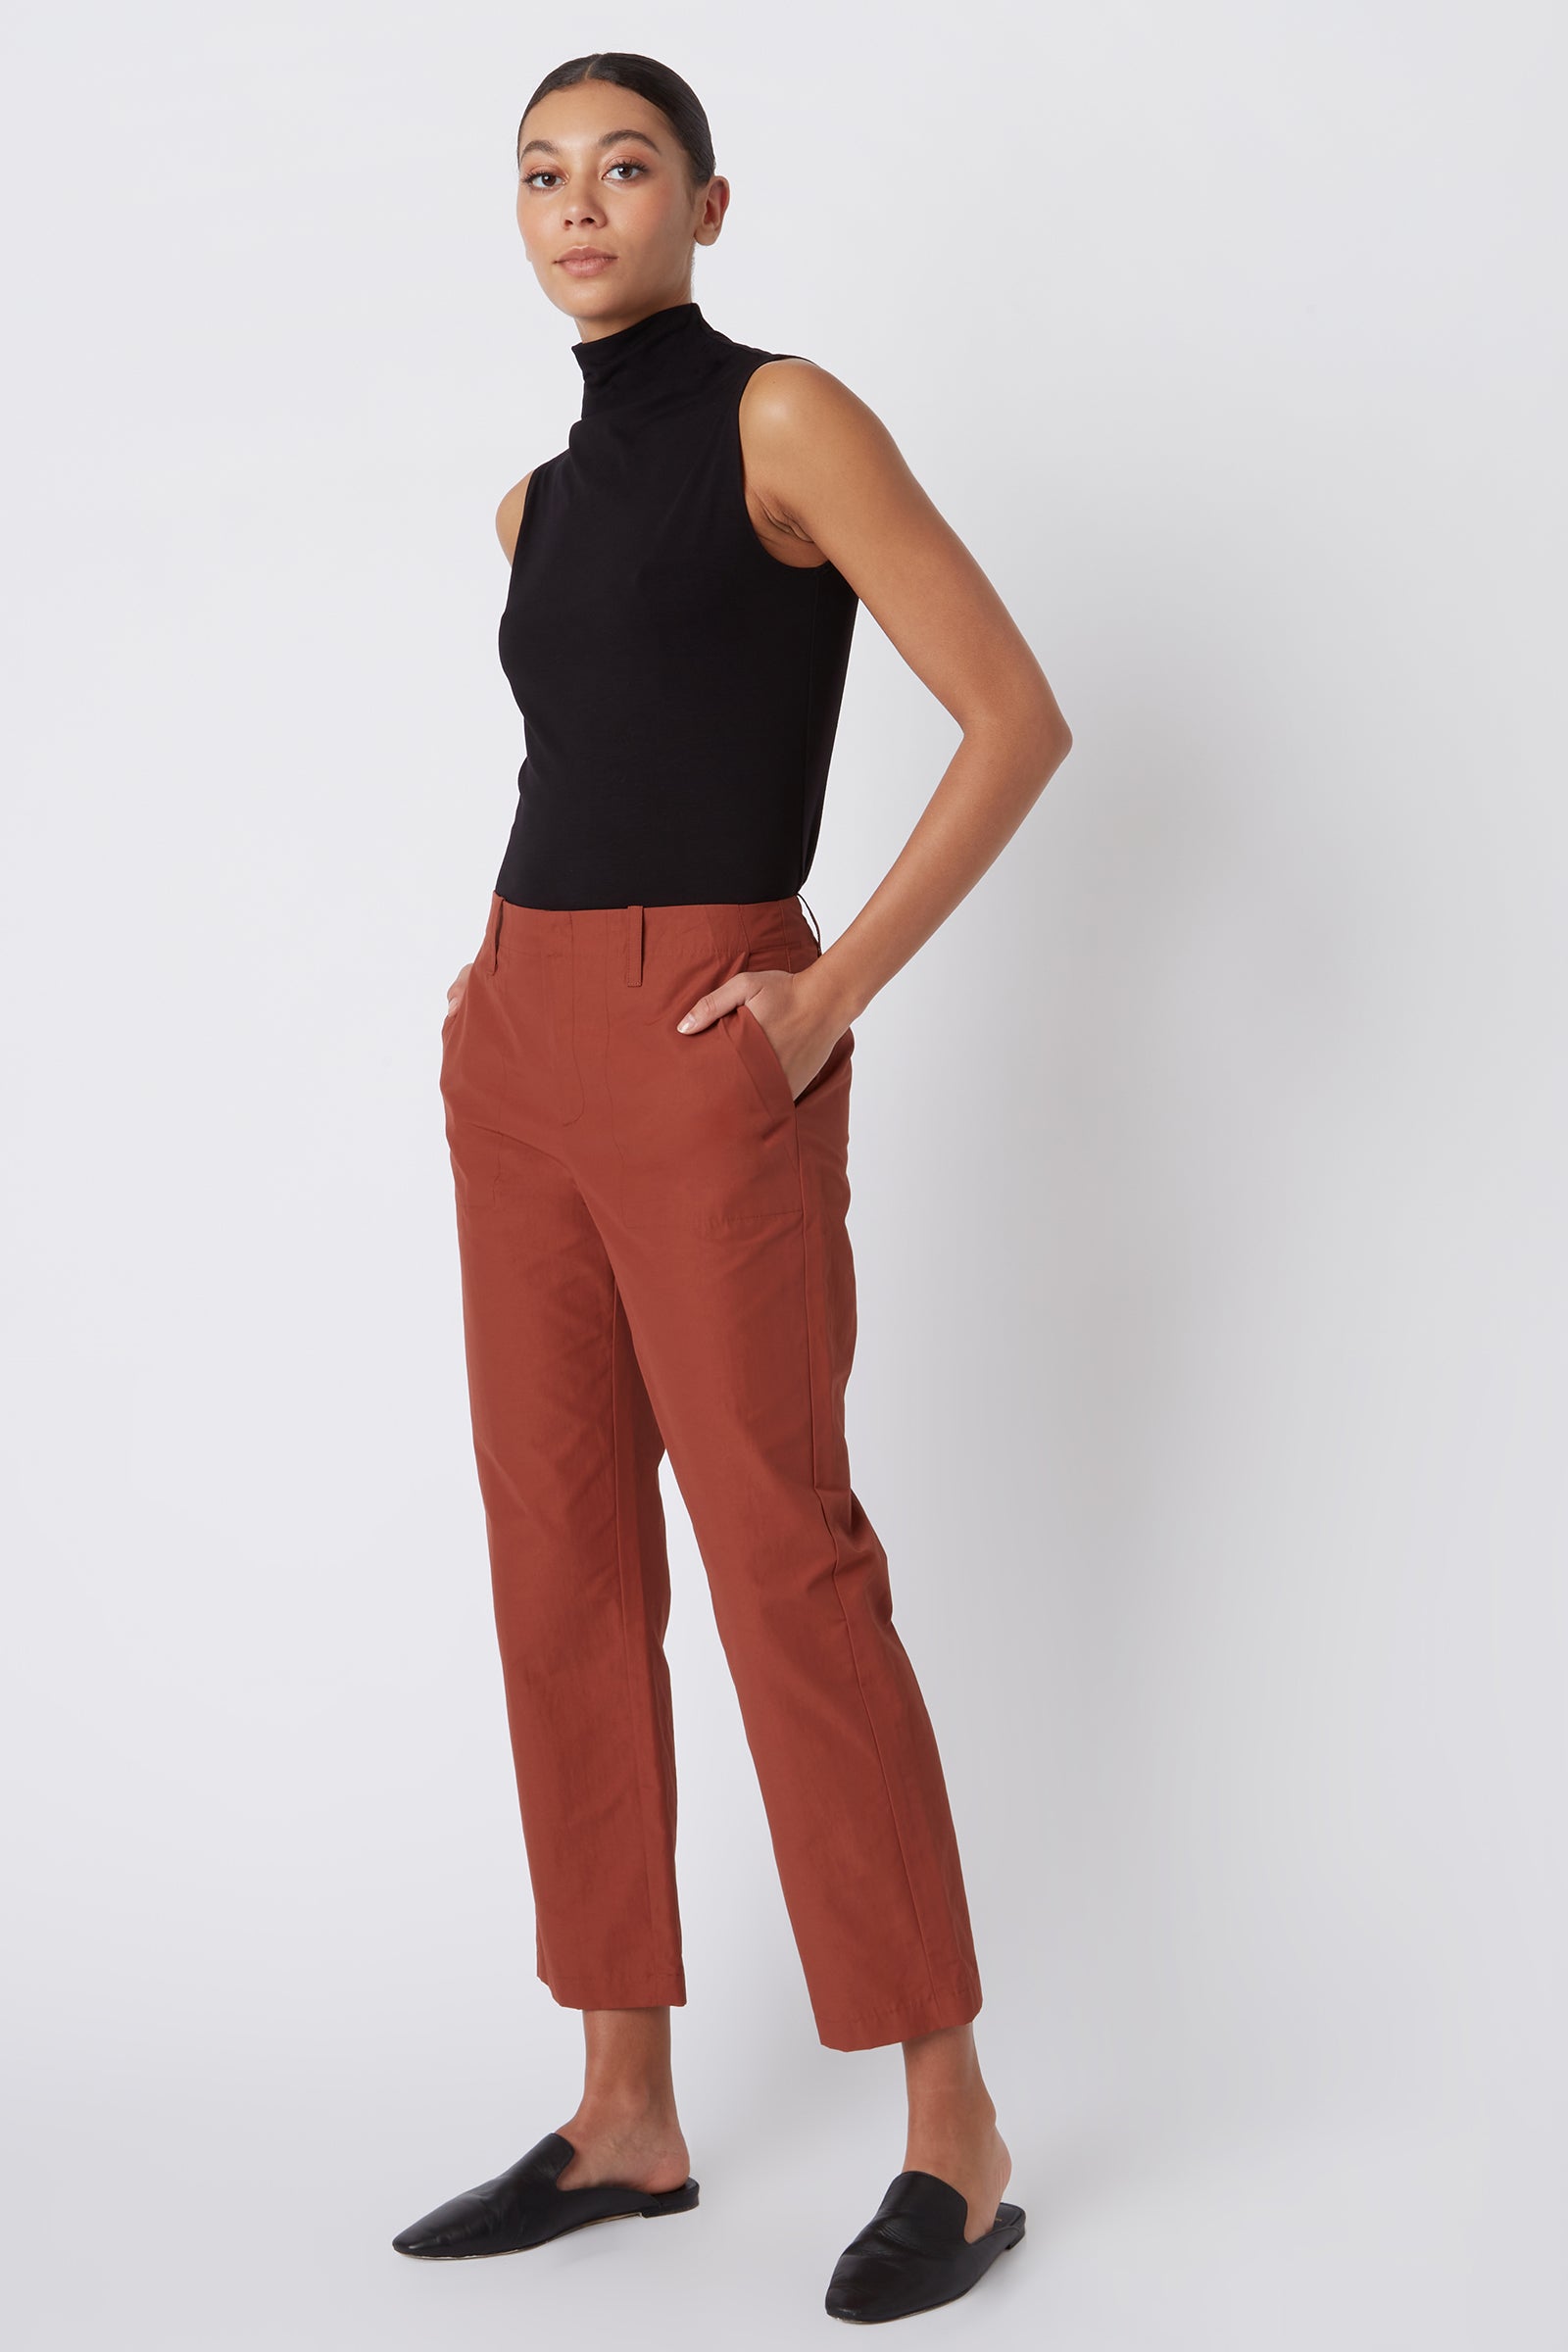 Kal Rieman Francoise Cigarette Pant in Rust Italian Broadcloth on Model with Hands in Pockets Full Front Side View